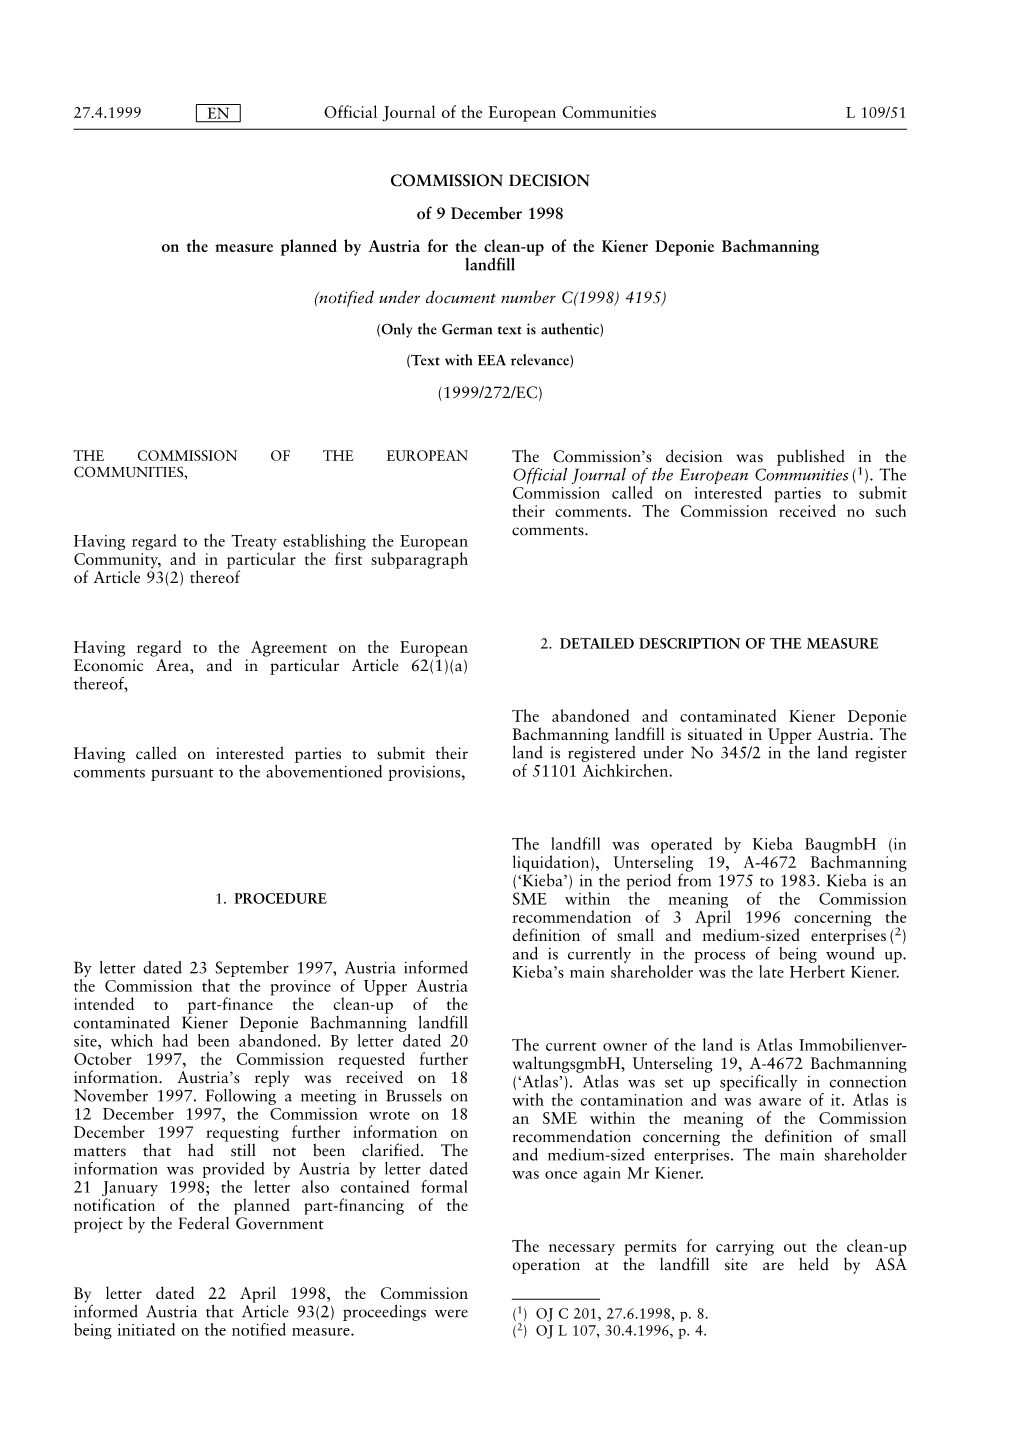 COMMISSION DECISION of 9 December 1998 on the Measure